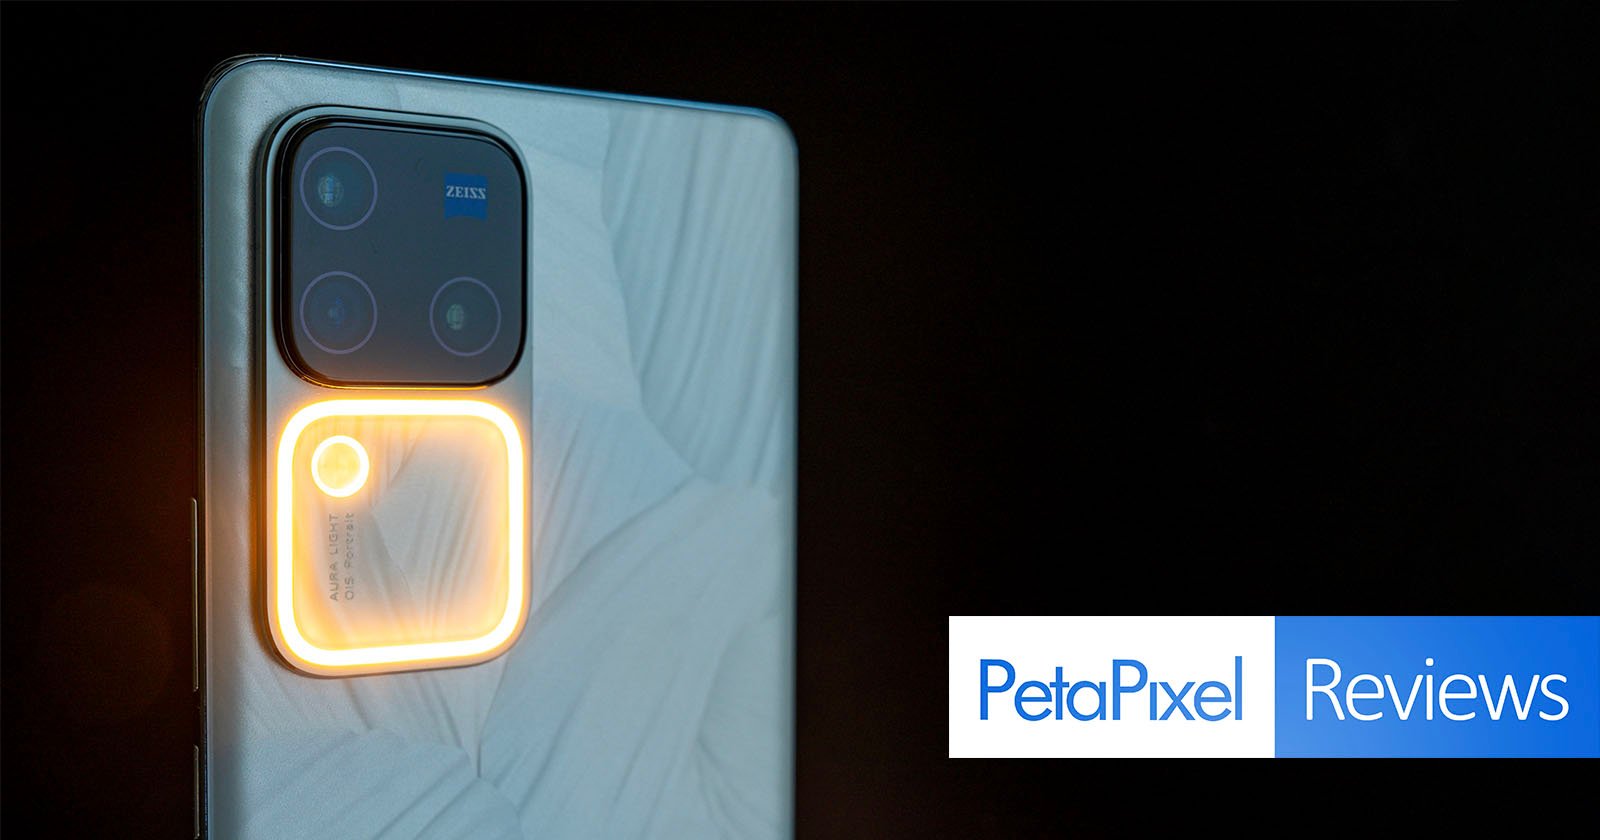 A close-up of a smartphone with a sophisticated camera system, featuring a large lens with a glowing ring light, set against a dark background. the logo petapixel reviews is visible in the corner.